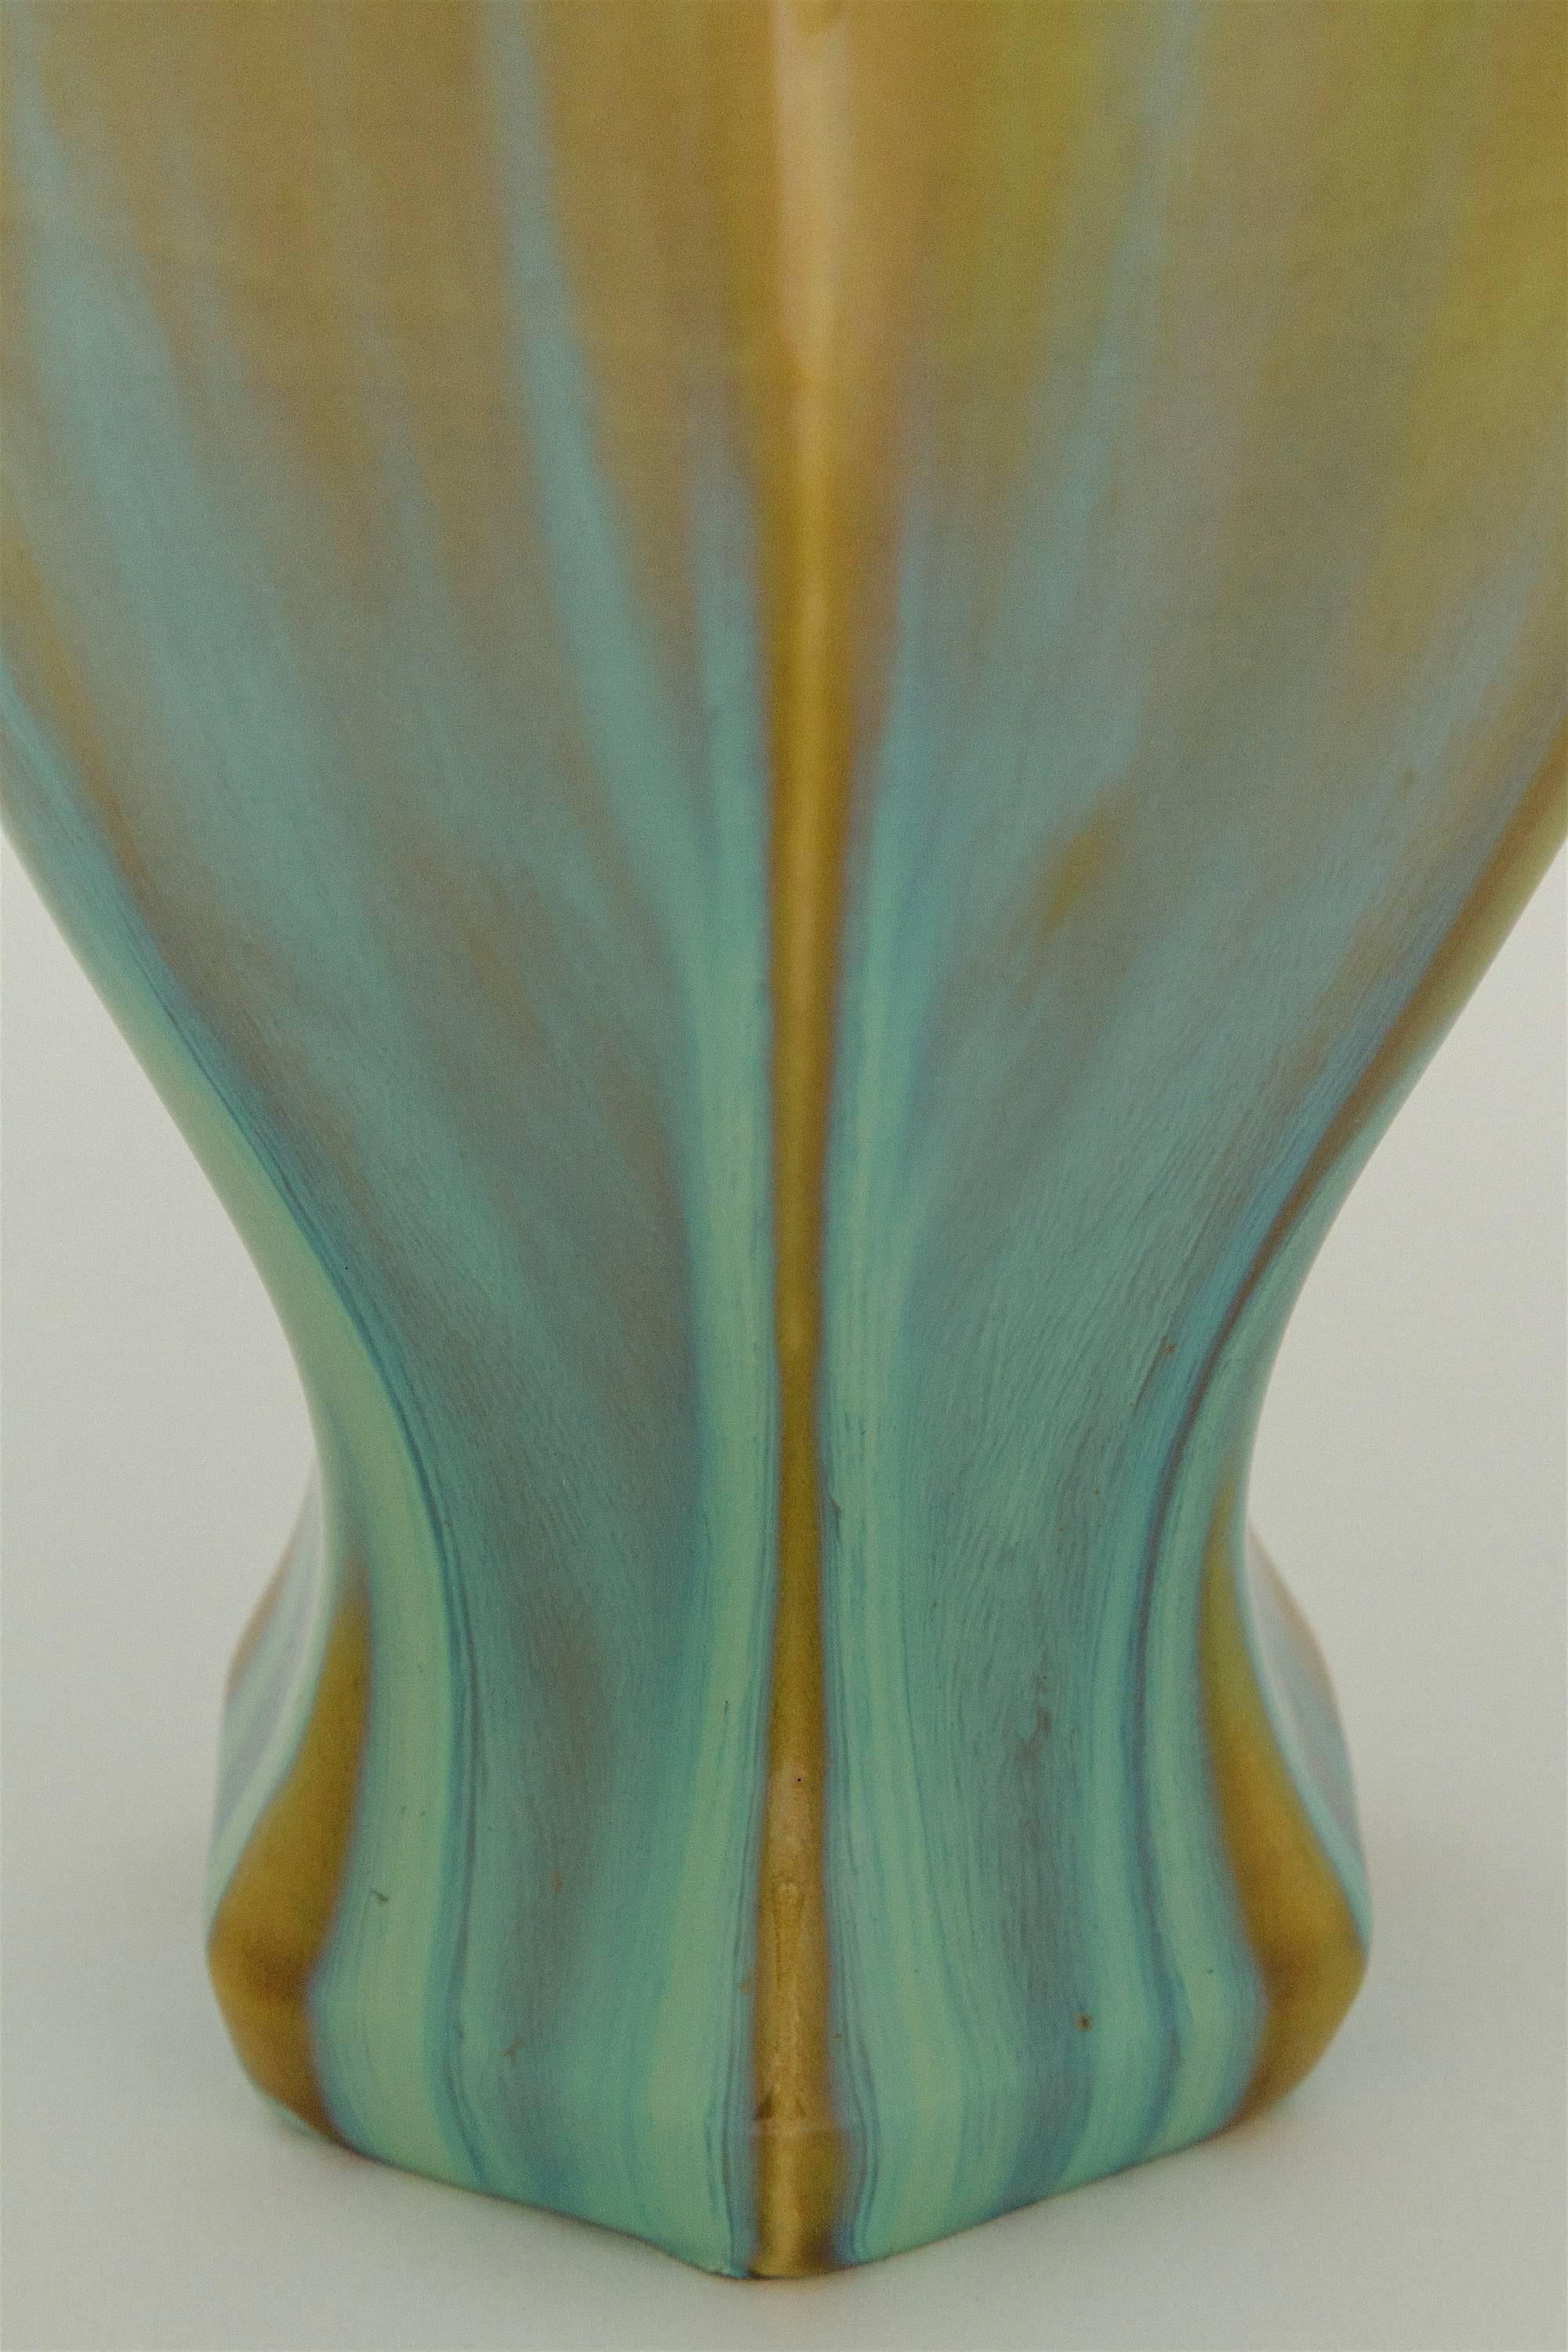 An early 20th century tall, hexagonal Arts and Crafts vase from Fulper Pottery of Flemington, New Jersey. The vase is Fulper's 660 form, decorated with a vibrant flambe glaze in contrasting shades of frothy green and golden brown. 

Marked